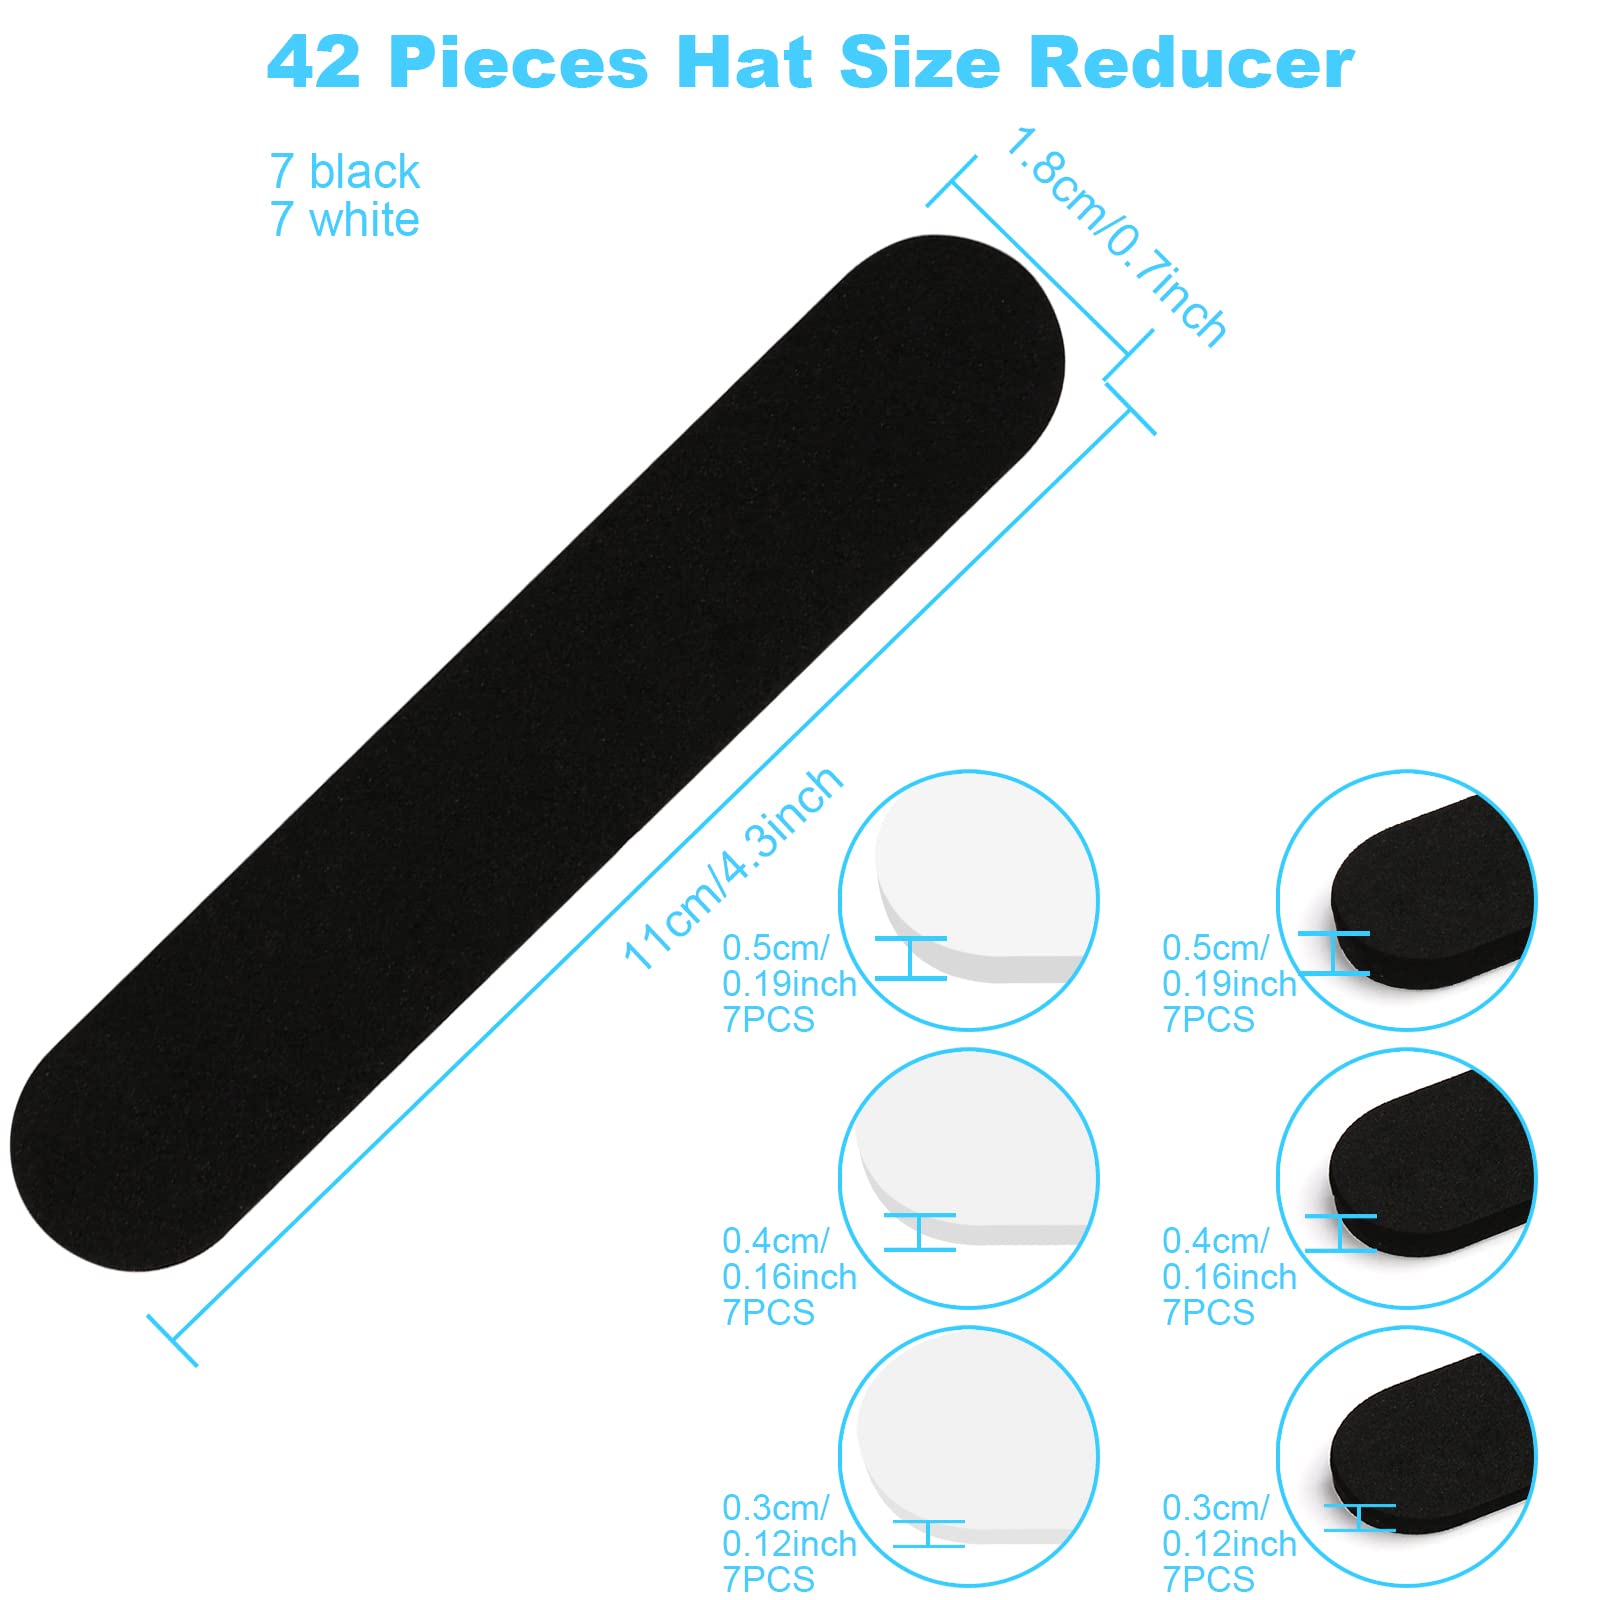 42 PCS Hat Size Reducer, PHSZZ Foam Hat Sizing Tape, Filler Sizer Reducer Insert Adhesive for Hats Cap Sweatband, 3 sizes (3mm 4mm 5mm Black and White)